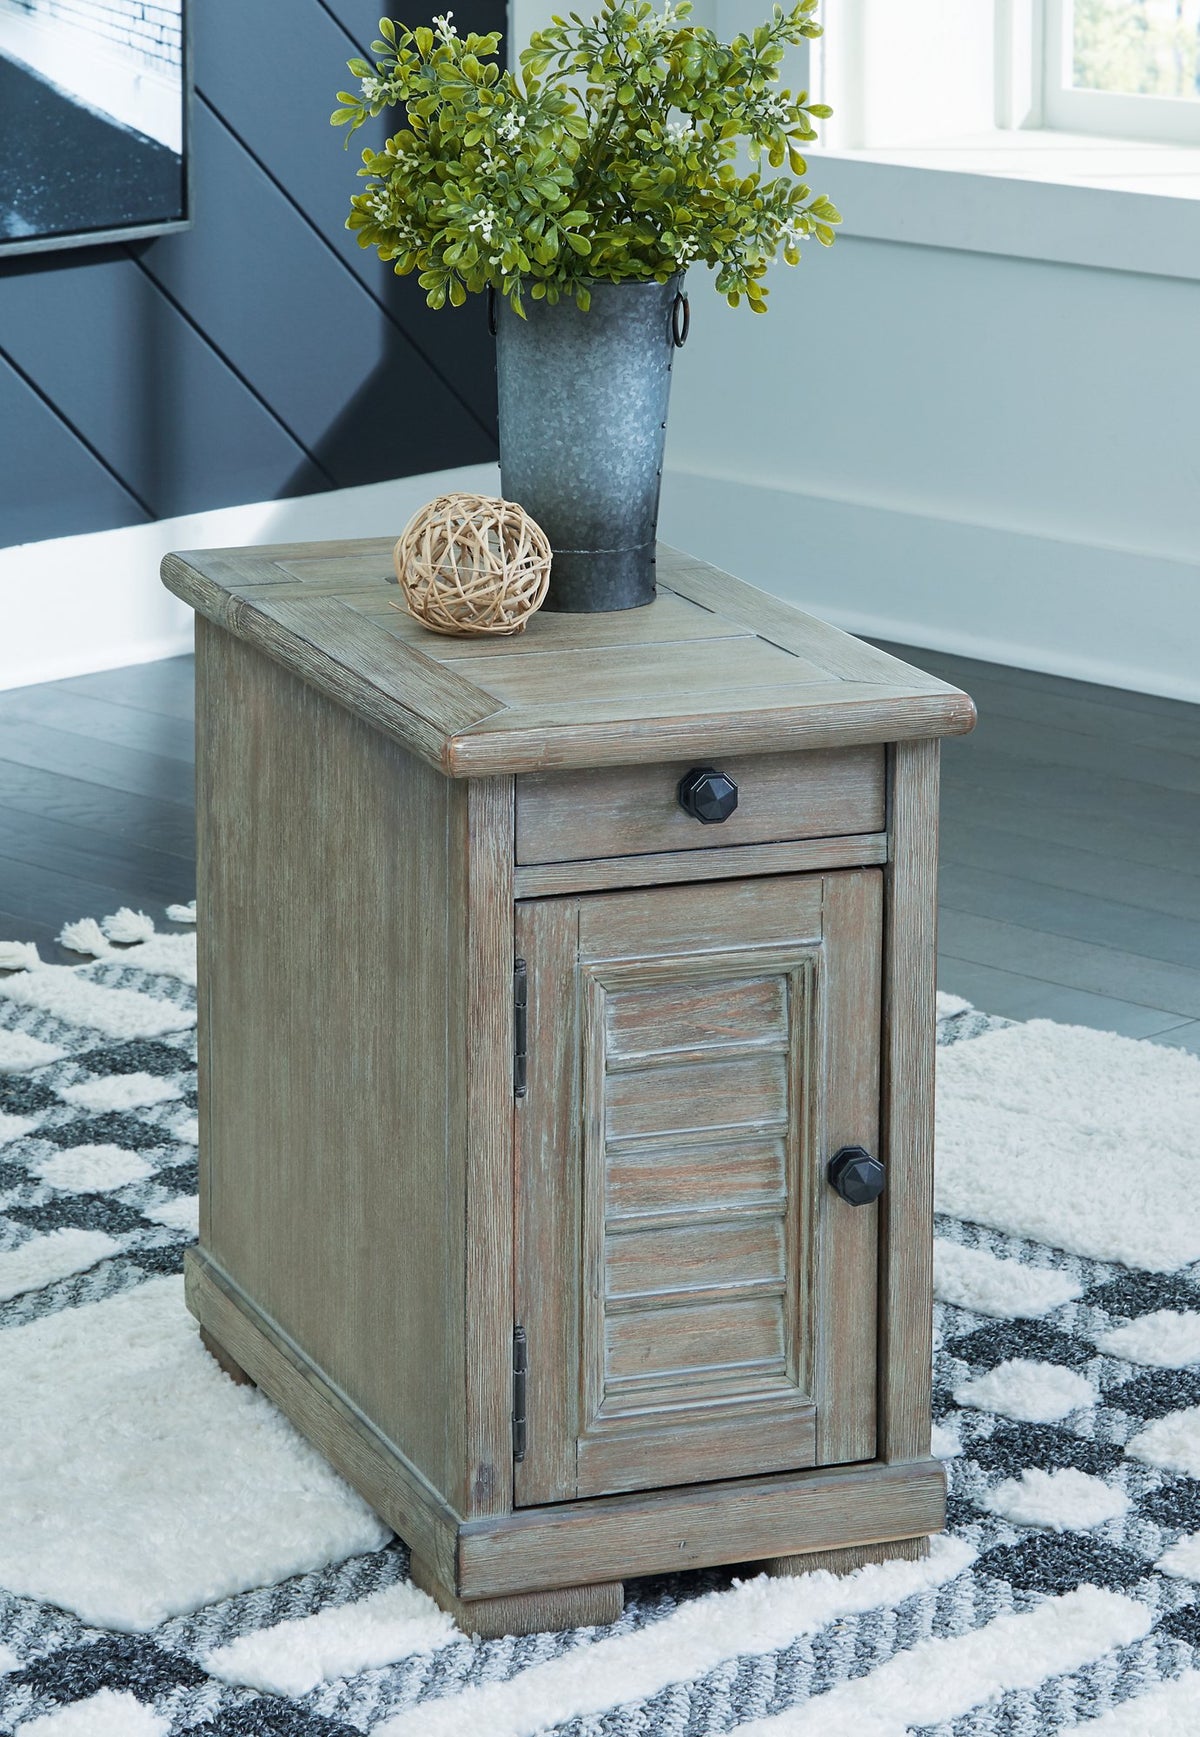 Moreshire Chairside End Table - Half Price Furniture